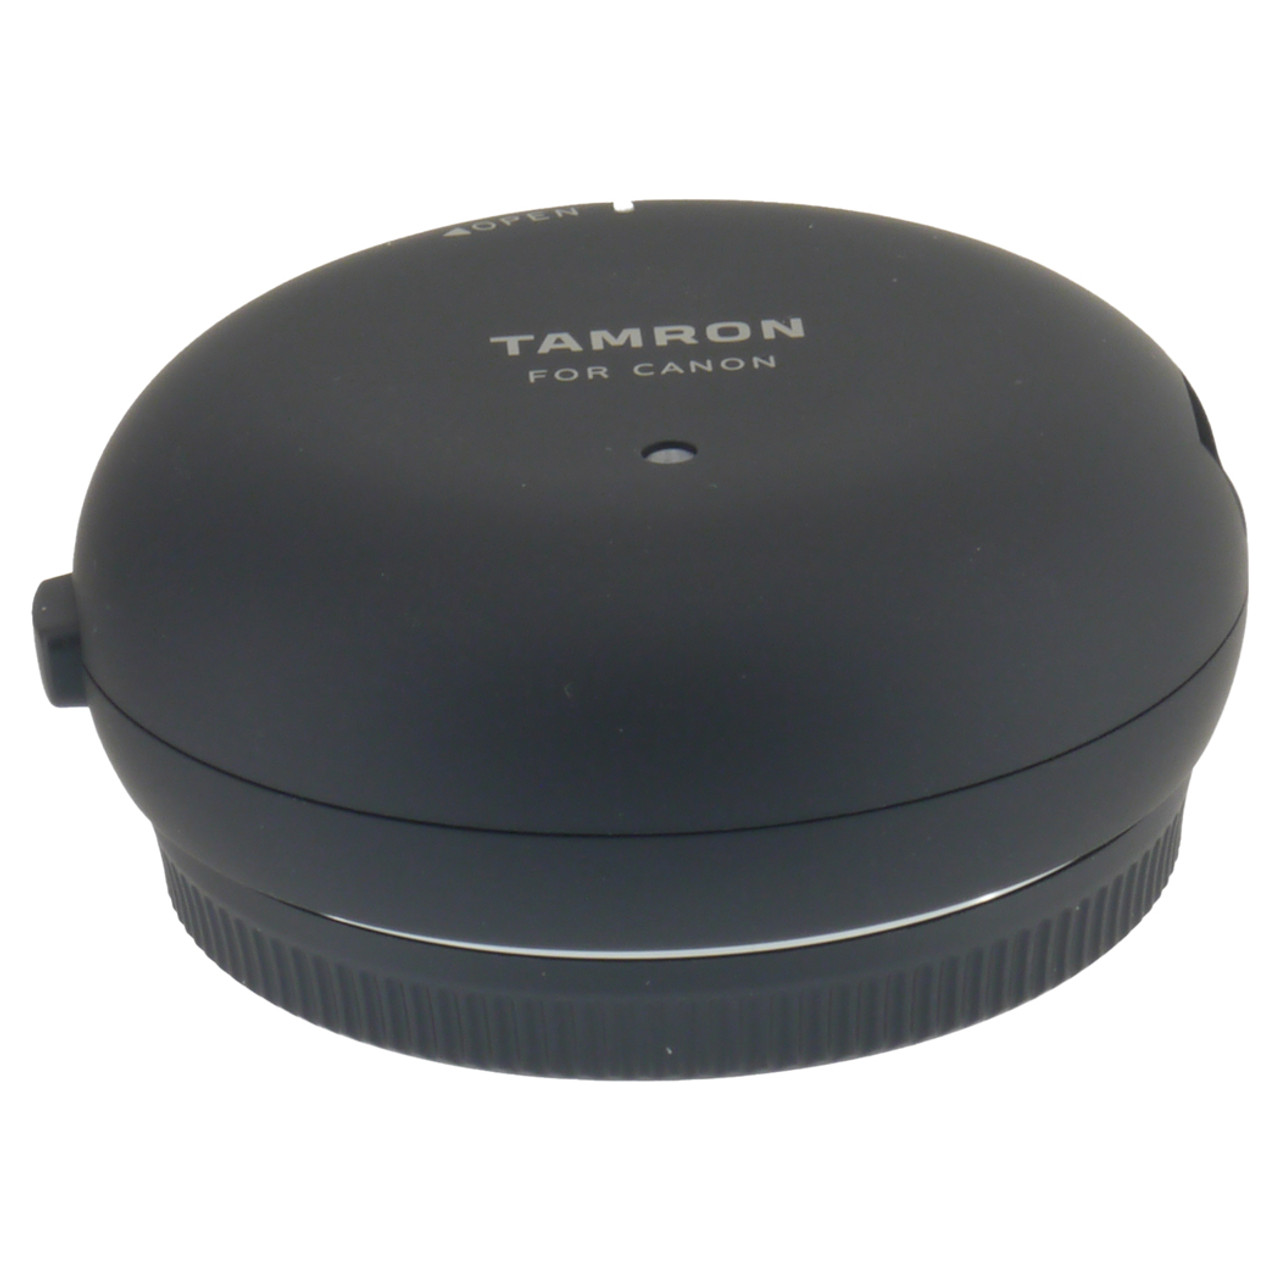 USED TAMRON TAP-IN CONSOLE (CANON EF) (762300)